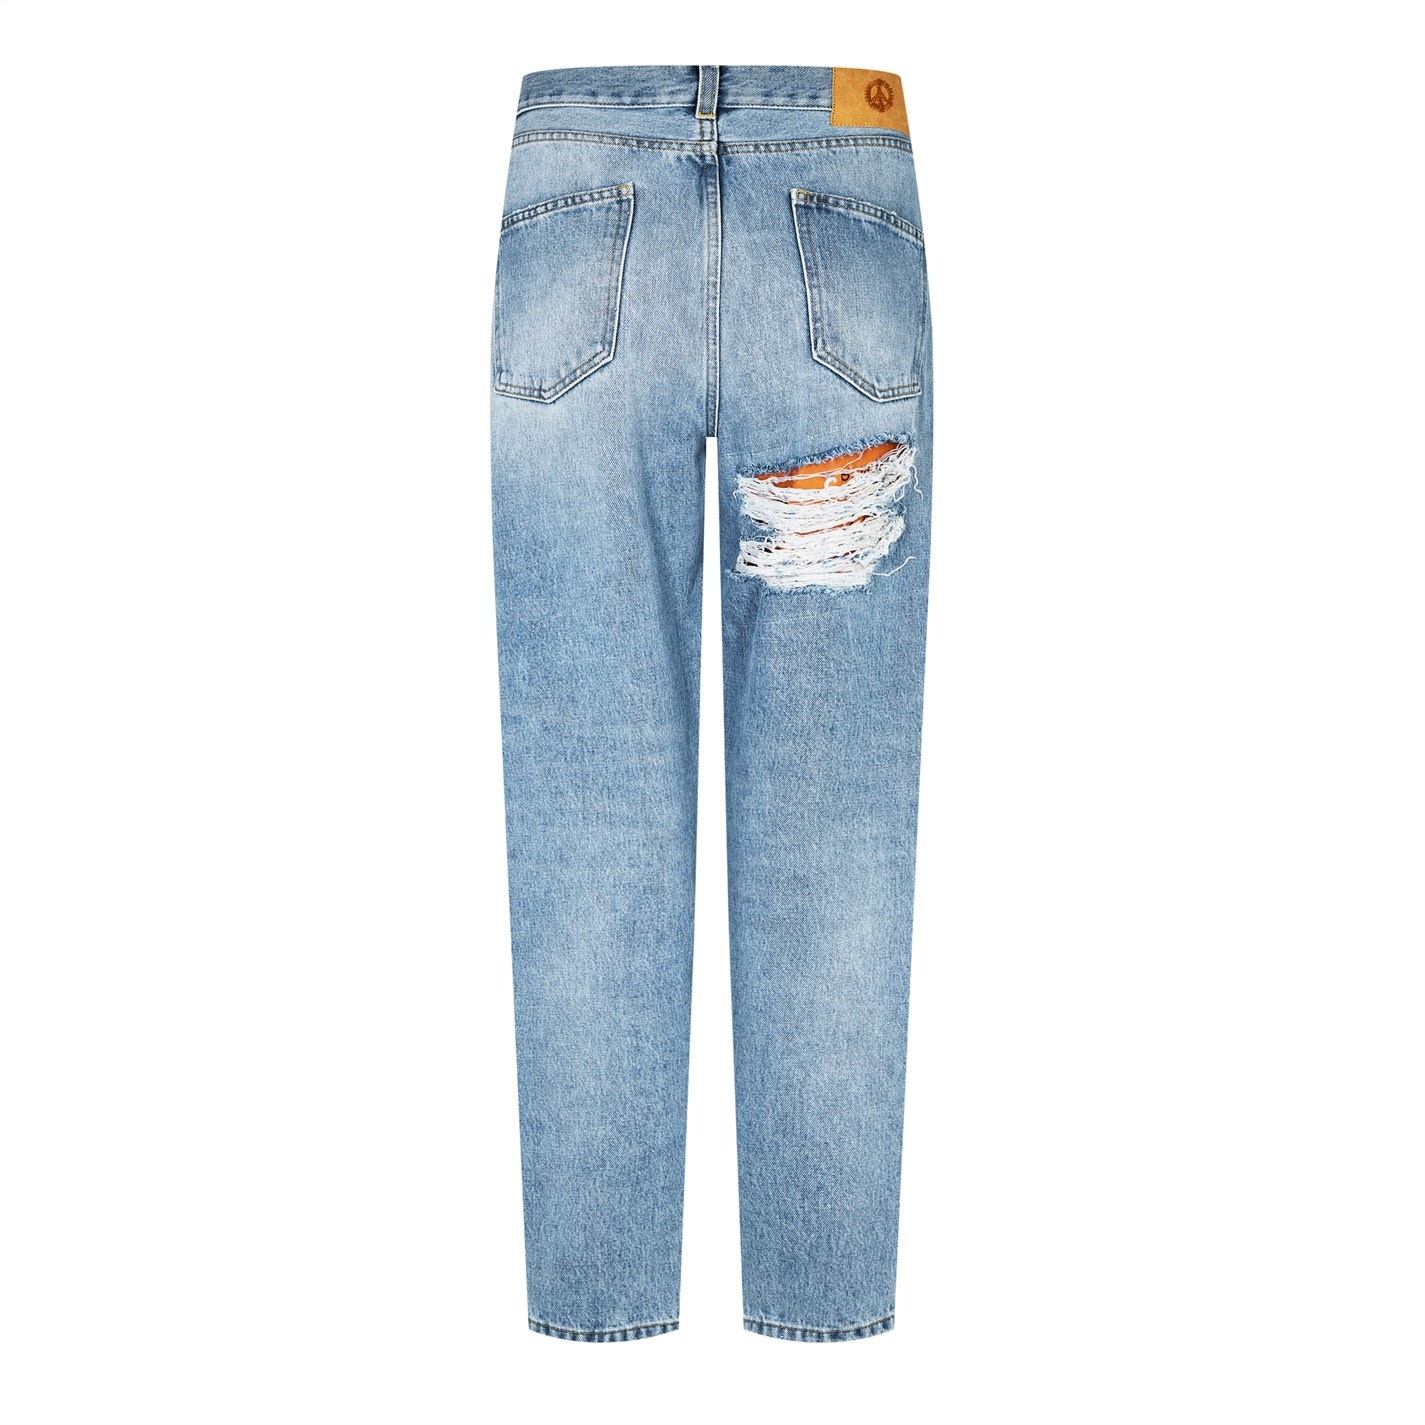 Patchwork wide-leg jeans in blue - Alanui